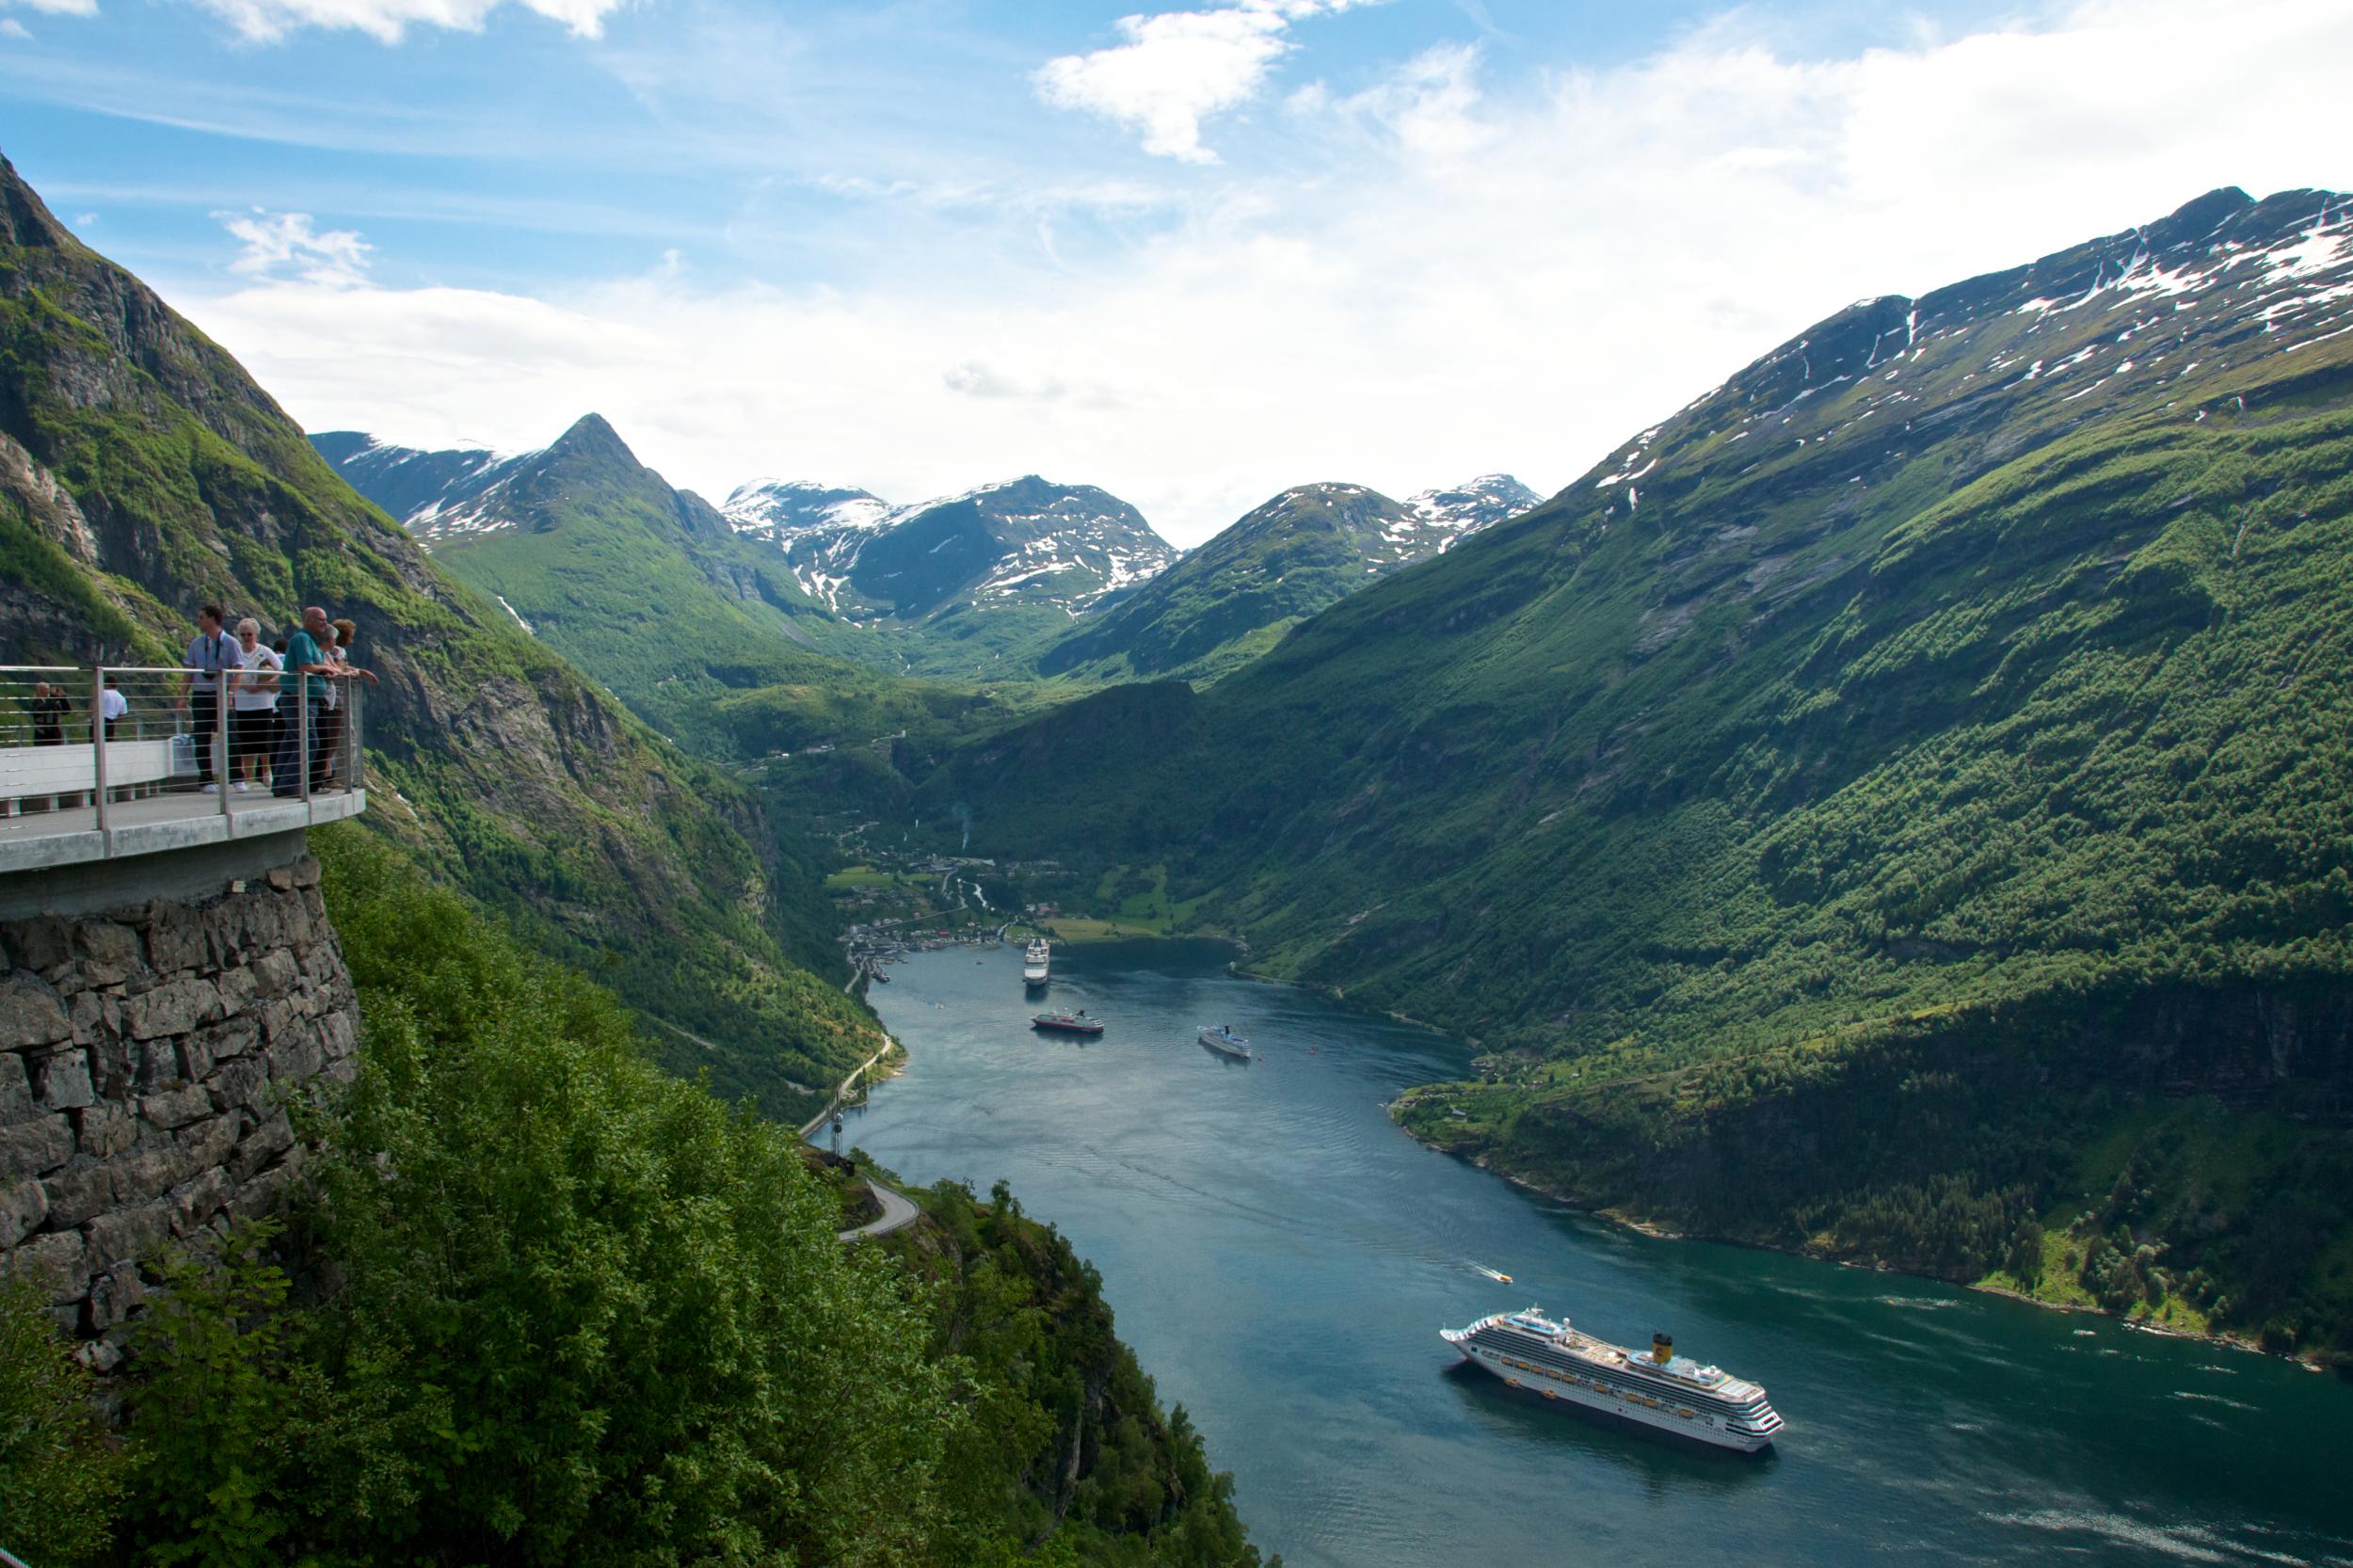 The fjords are best appreciated from the water